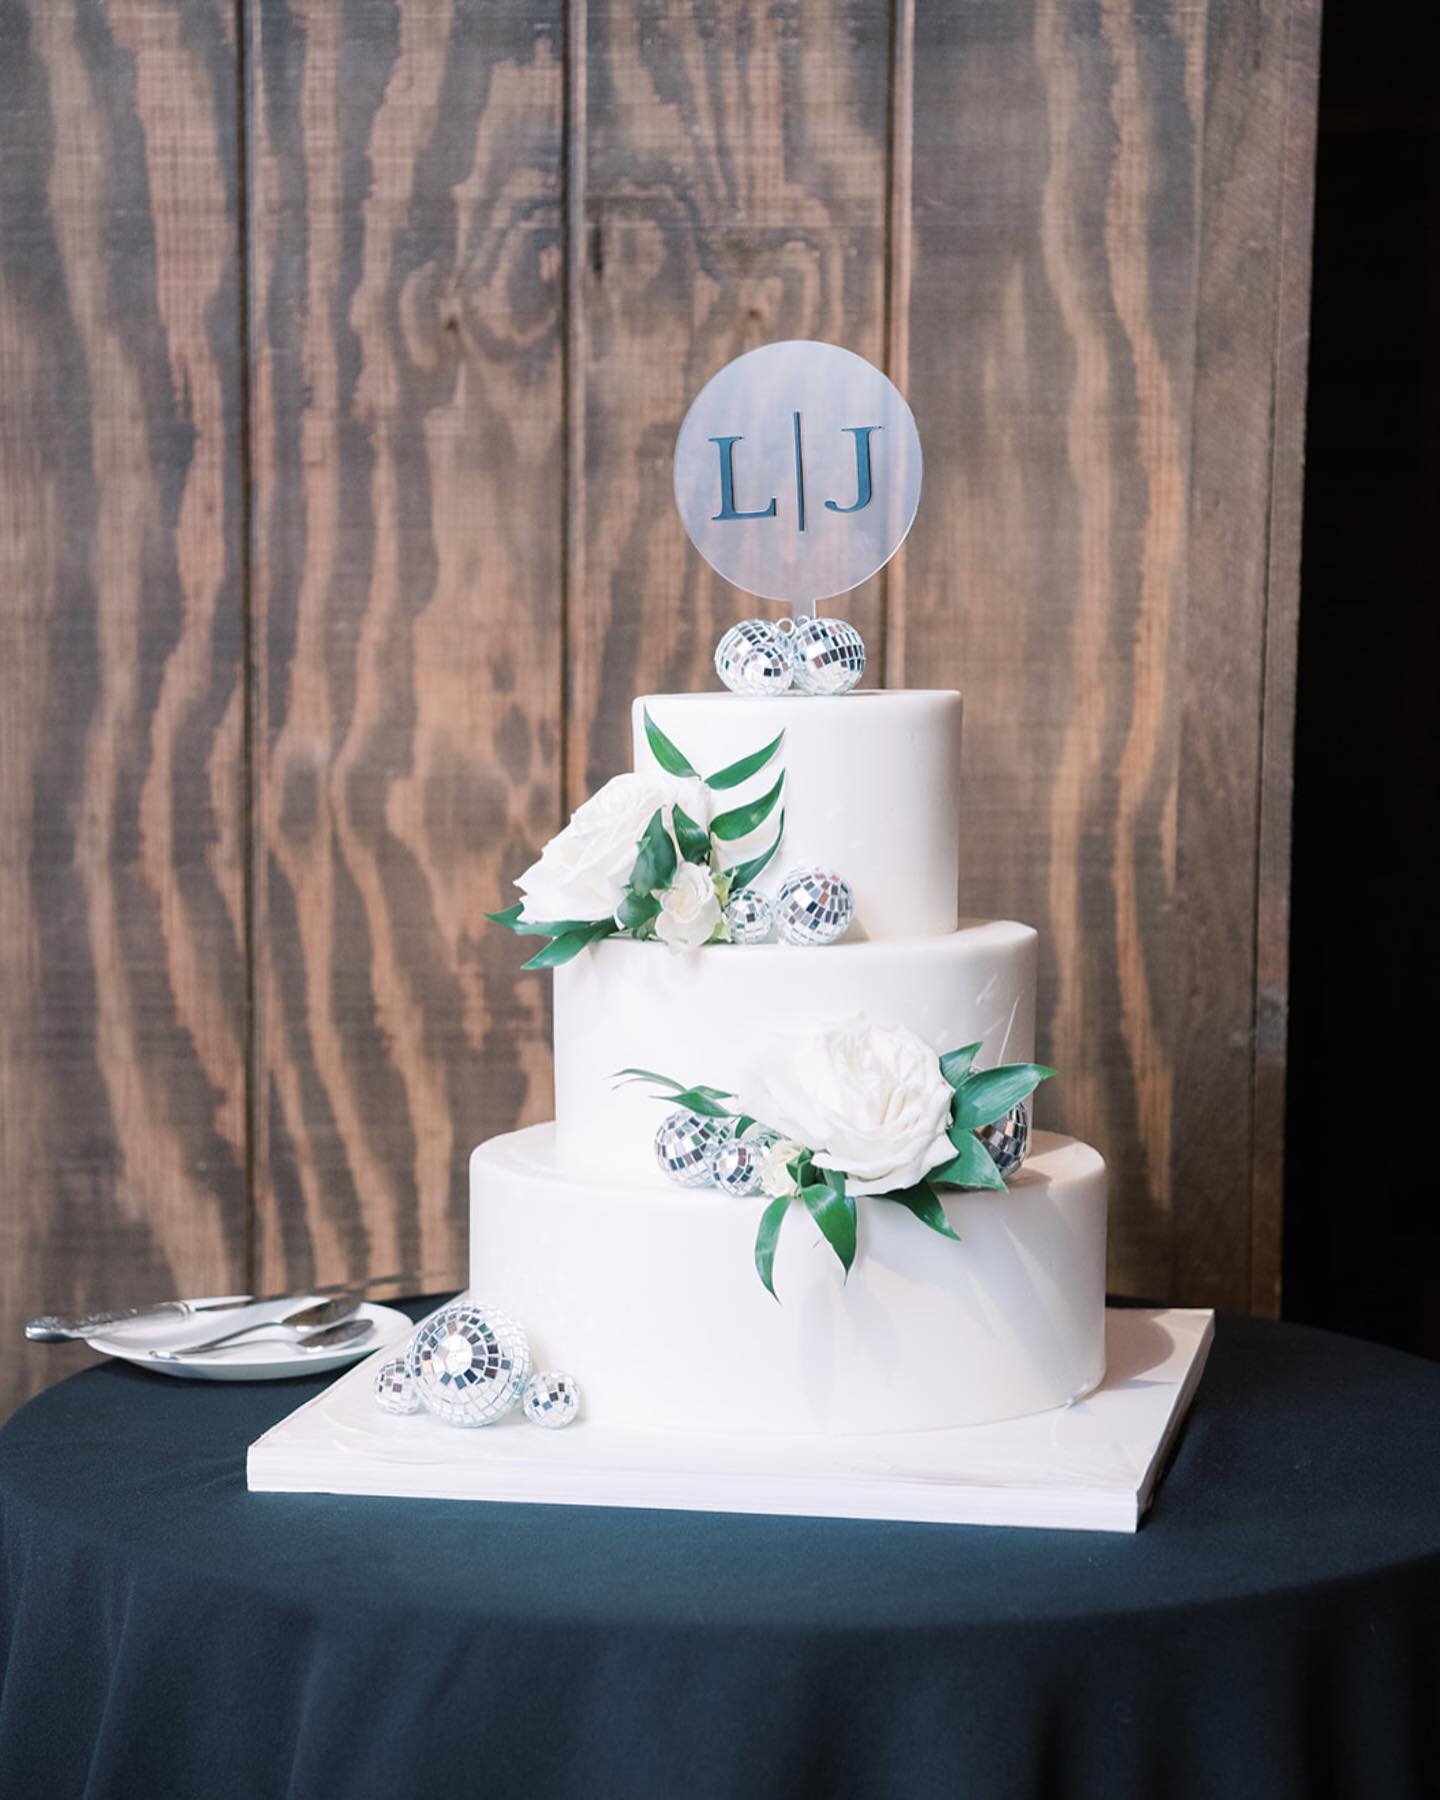 It&rsquo;s been one month since this incredible NYE wedding with its dreamy disco ball cake and our cake topper! I&rsquo;m someone who loves every detail of your wedding to coordinate, and cake toppers are no exception! We used L&amp;J&rsquo;s monogr